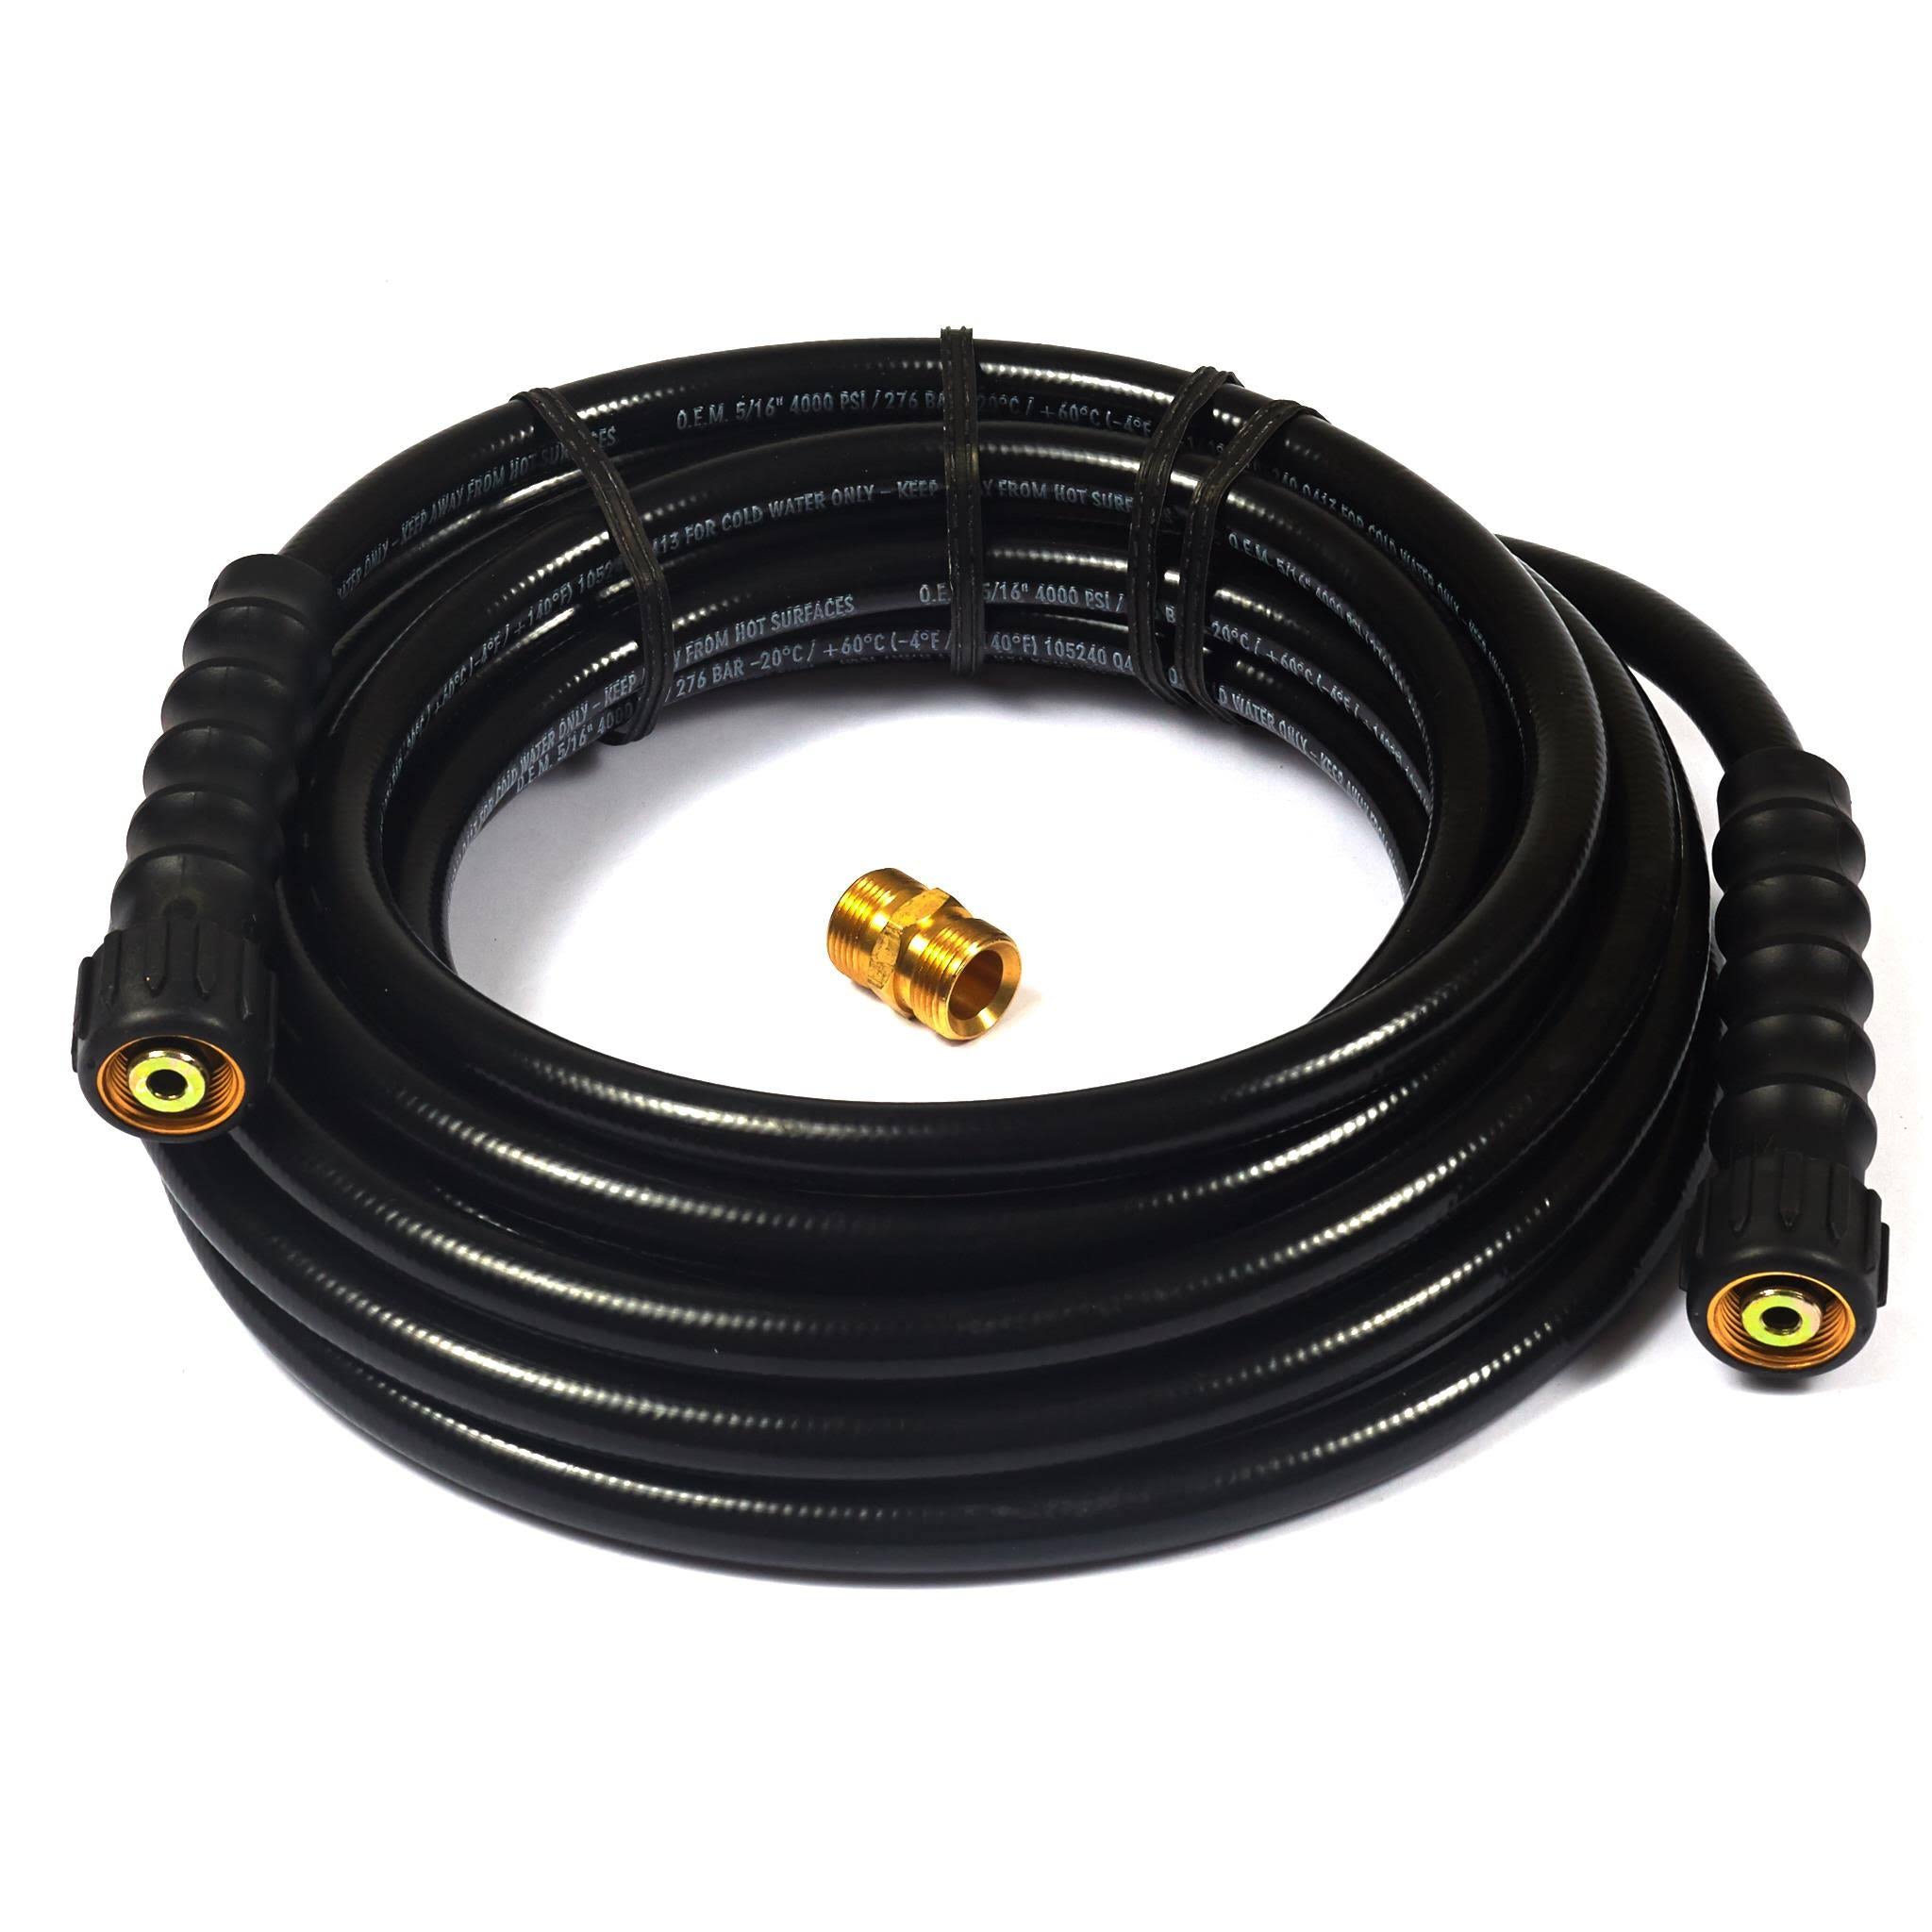 Briggs and Stratton 6189 Pressure Washer Replacement and Extension Hose - 25'